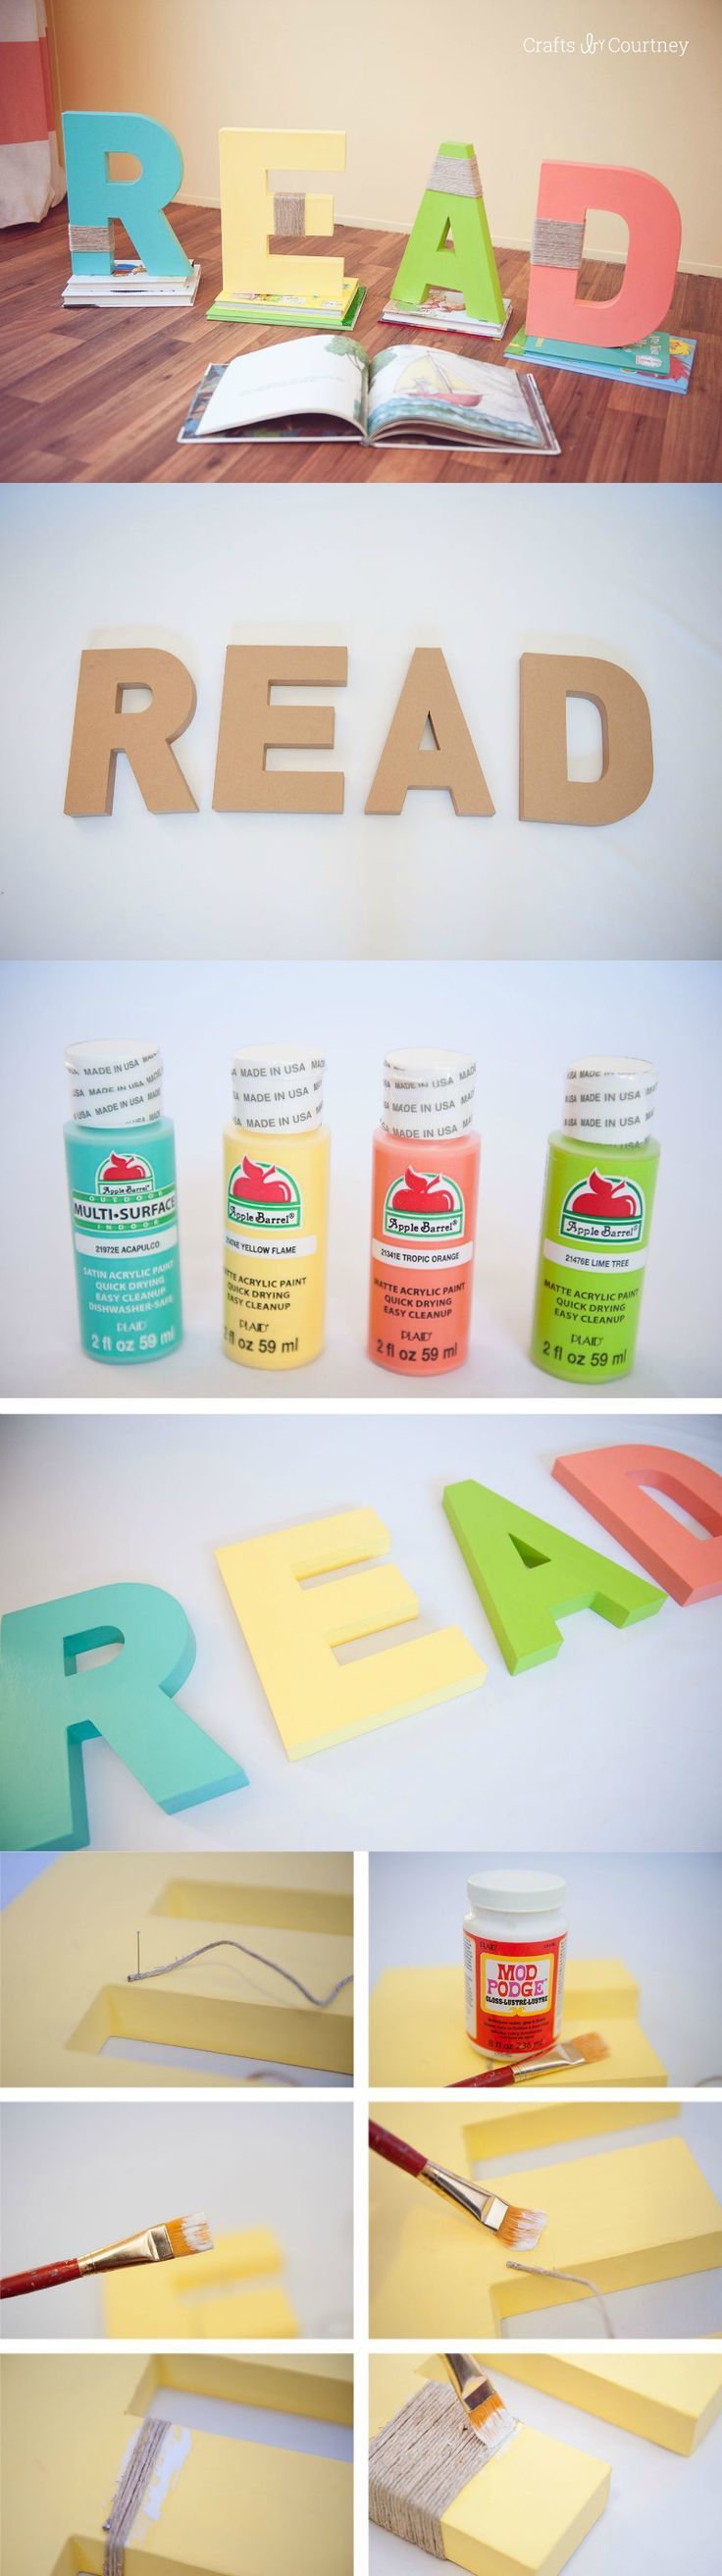 Make these colorful and unique READ letters for a kids' bedroom, book nook, ...